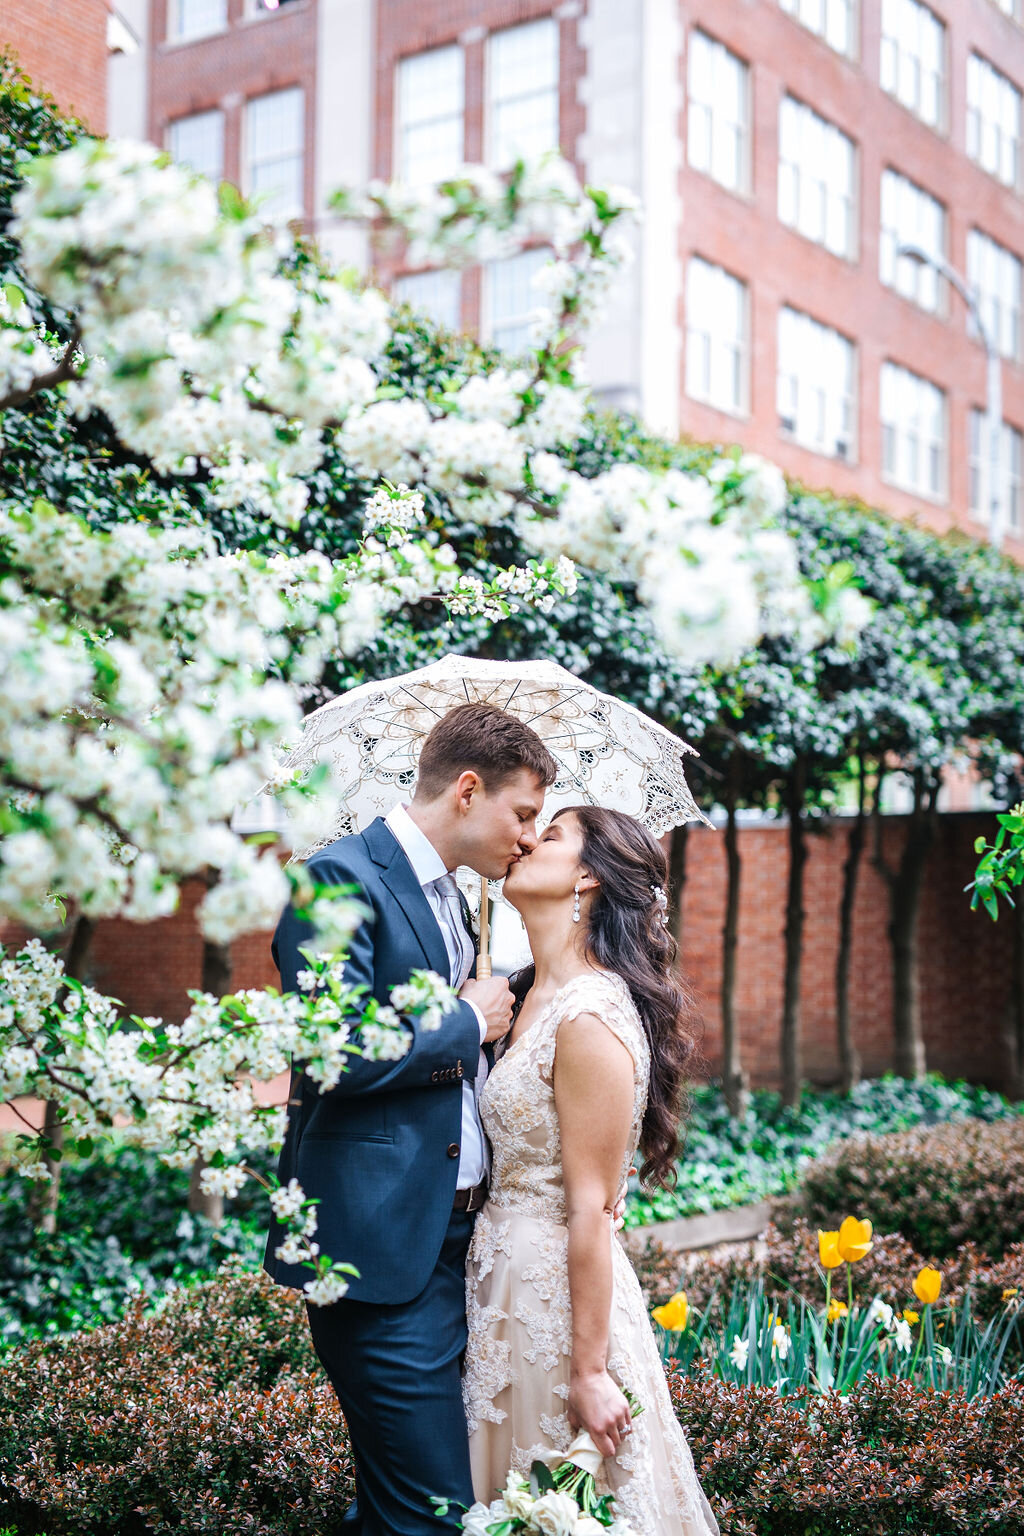 Long before the Coronavirus came to town, Amanda and Ben were dreaming up their intimate at home wedding ceremony. Followed by a lovely trip to Philadelphia for beautiful portraits under the cherry blossoms, old city, broad street and Attico Rooftop